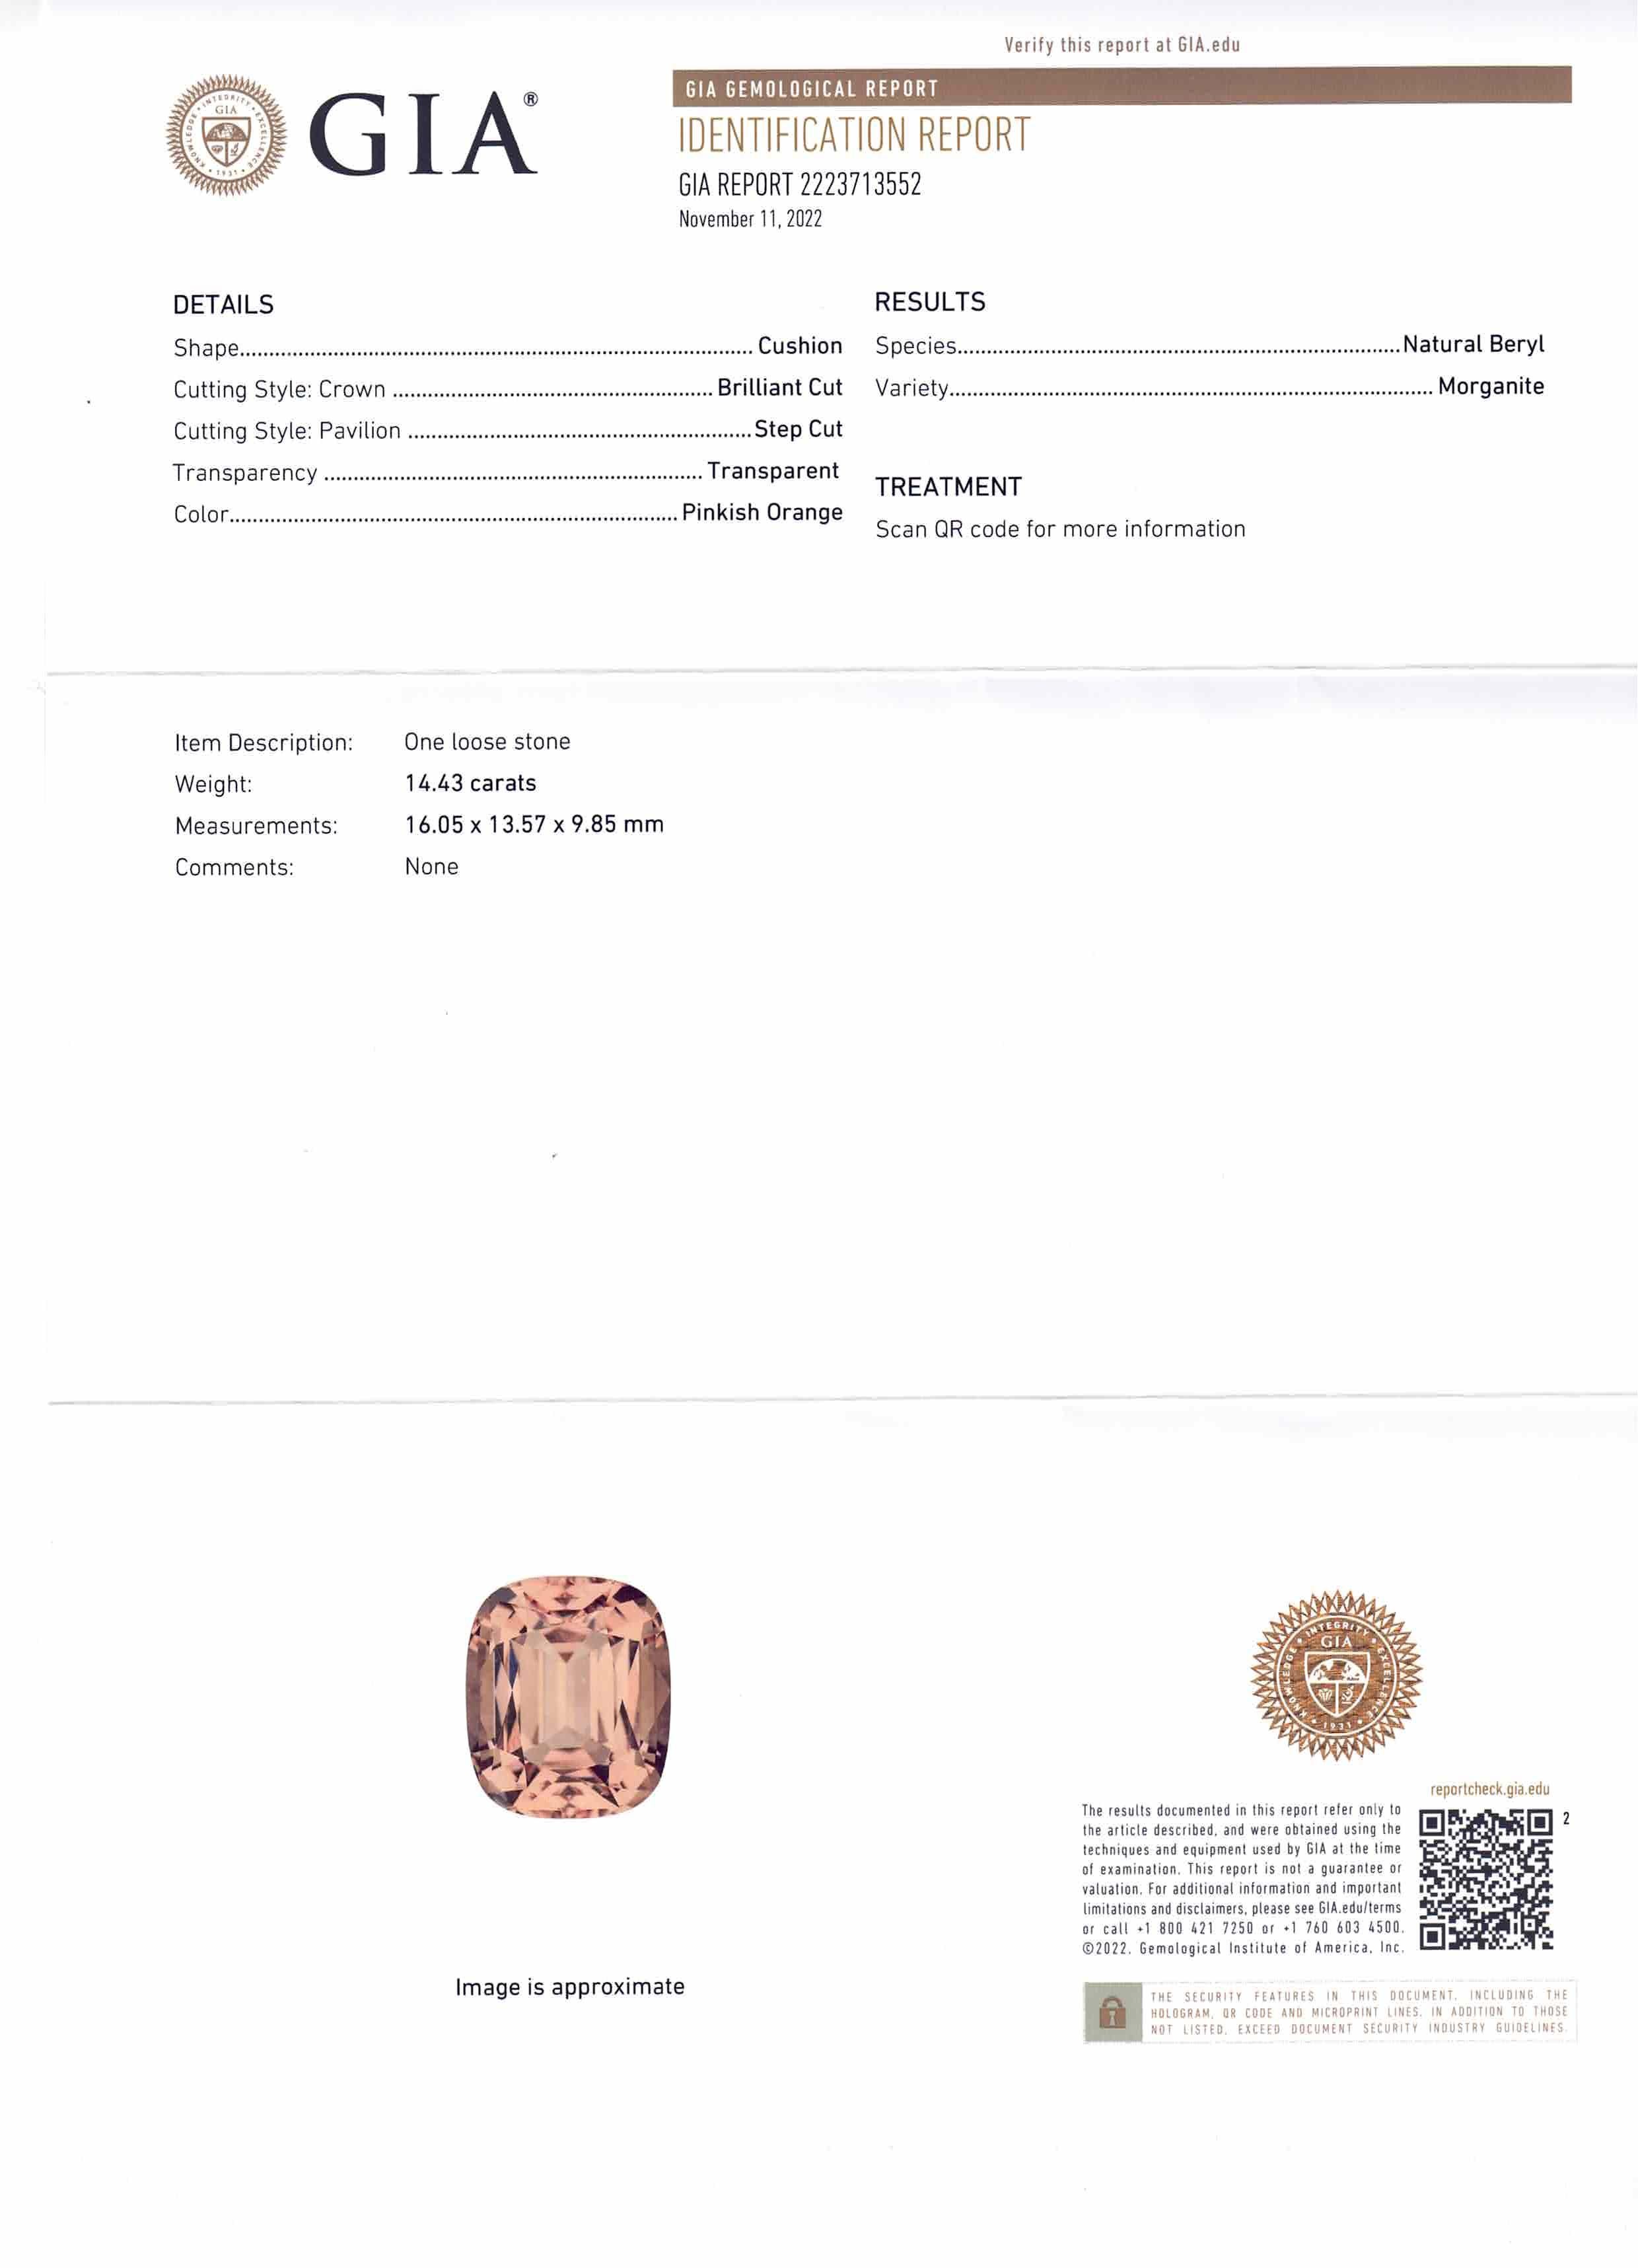 This is a stunning GIA Certified Morganite

 

The GIA report reads as follows:

GIA Report Number: 2223713552
Shape: Cushion
Cutting Style:
Cutting Style: Crown: Brilliant Cut
Cutting Style: Pavilion: Step Cut
Transparency: Transparent
Color: